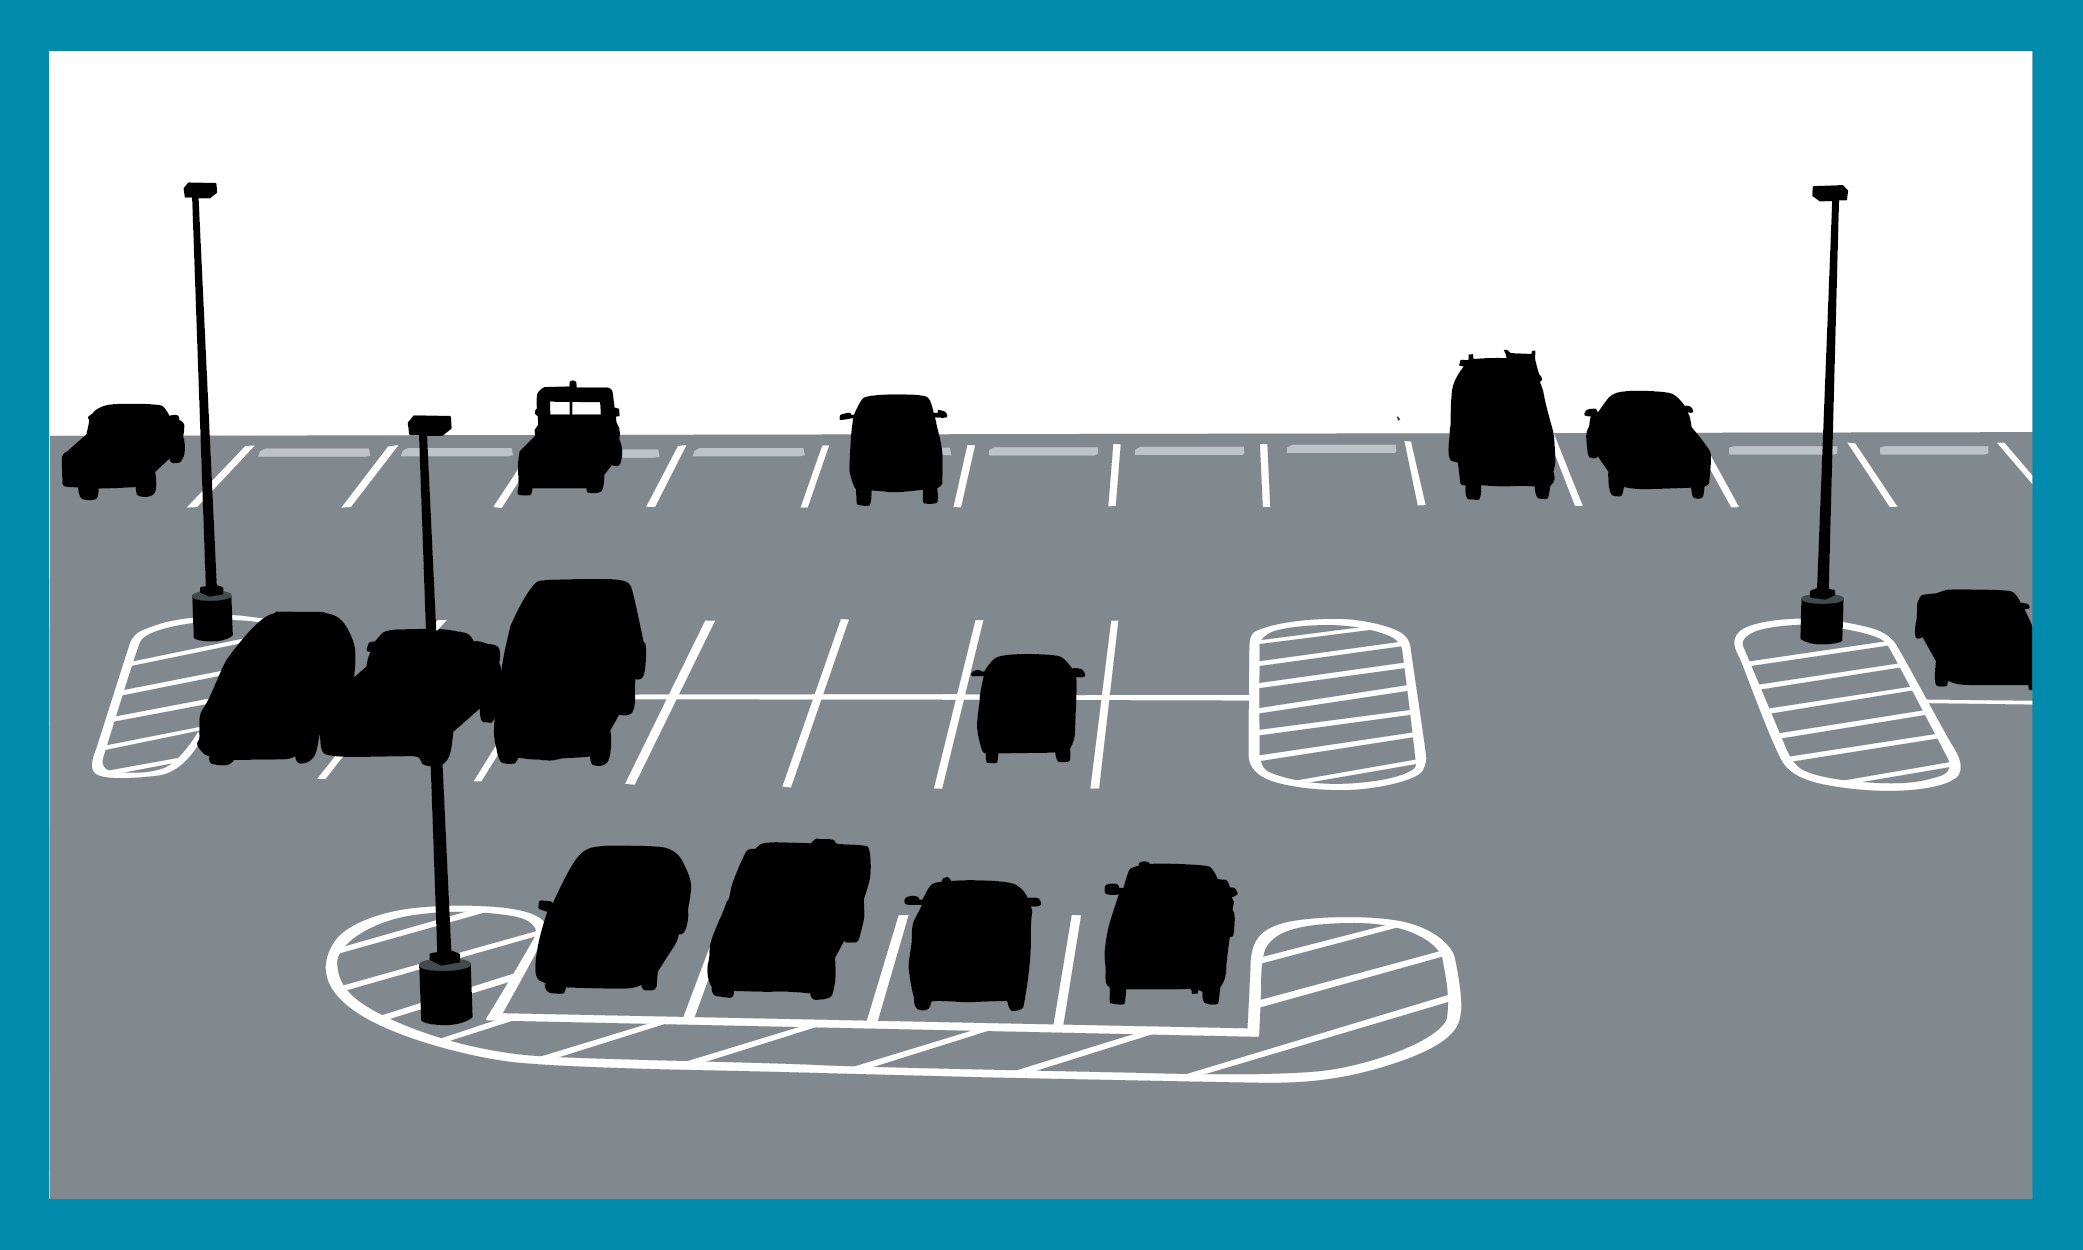 Graphic of a parking lot